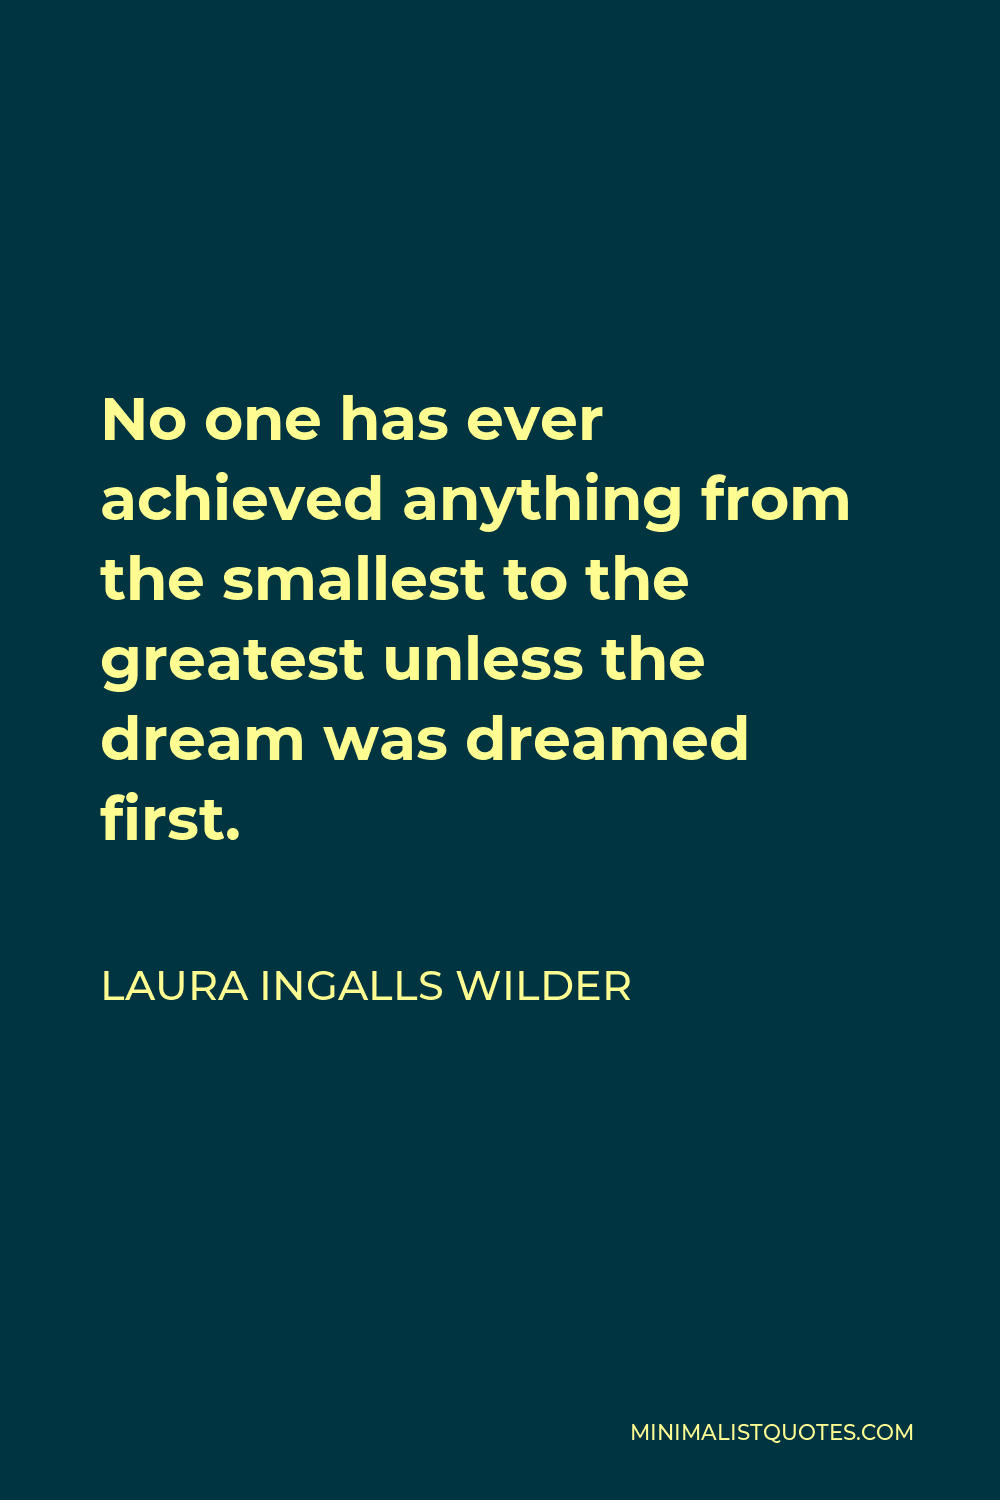 Laura Ingalls Wilder Quote - No one has ever achieved anything from the smallest to the greatest unless the dream was dreamed first.